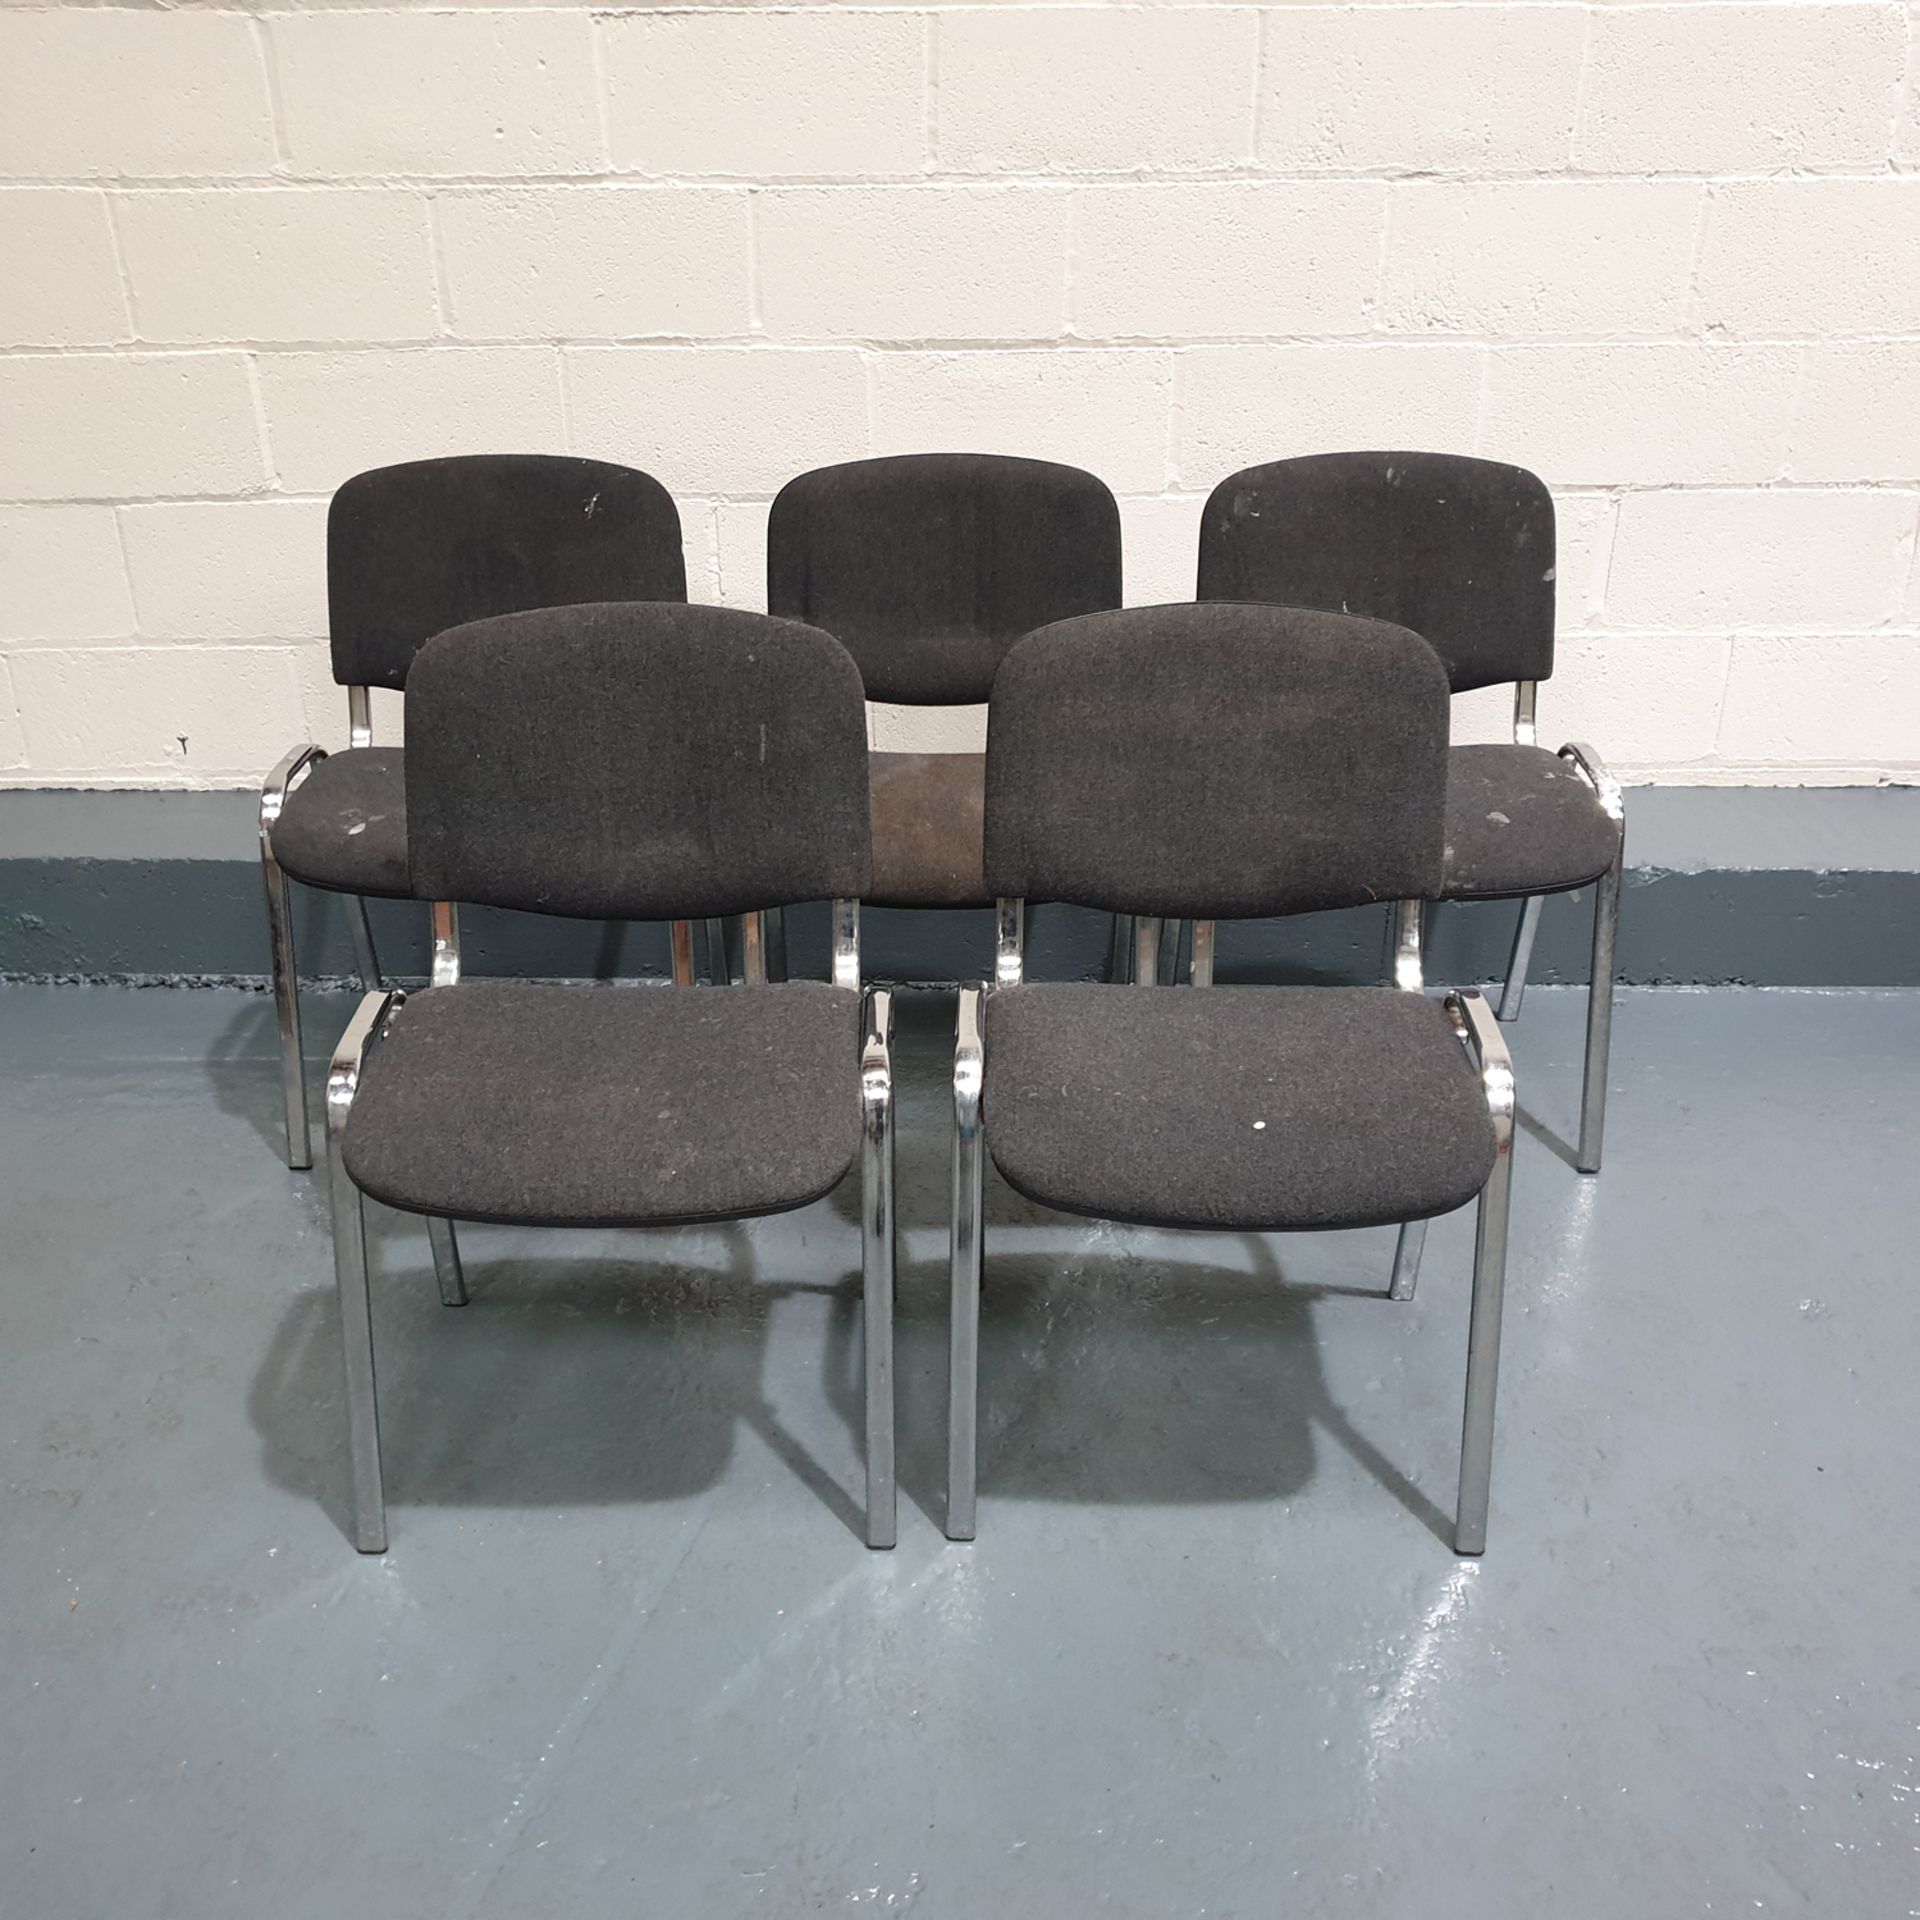 5 x Stackable Chairs.